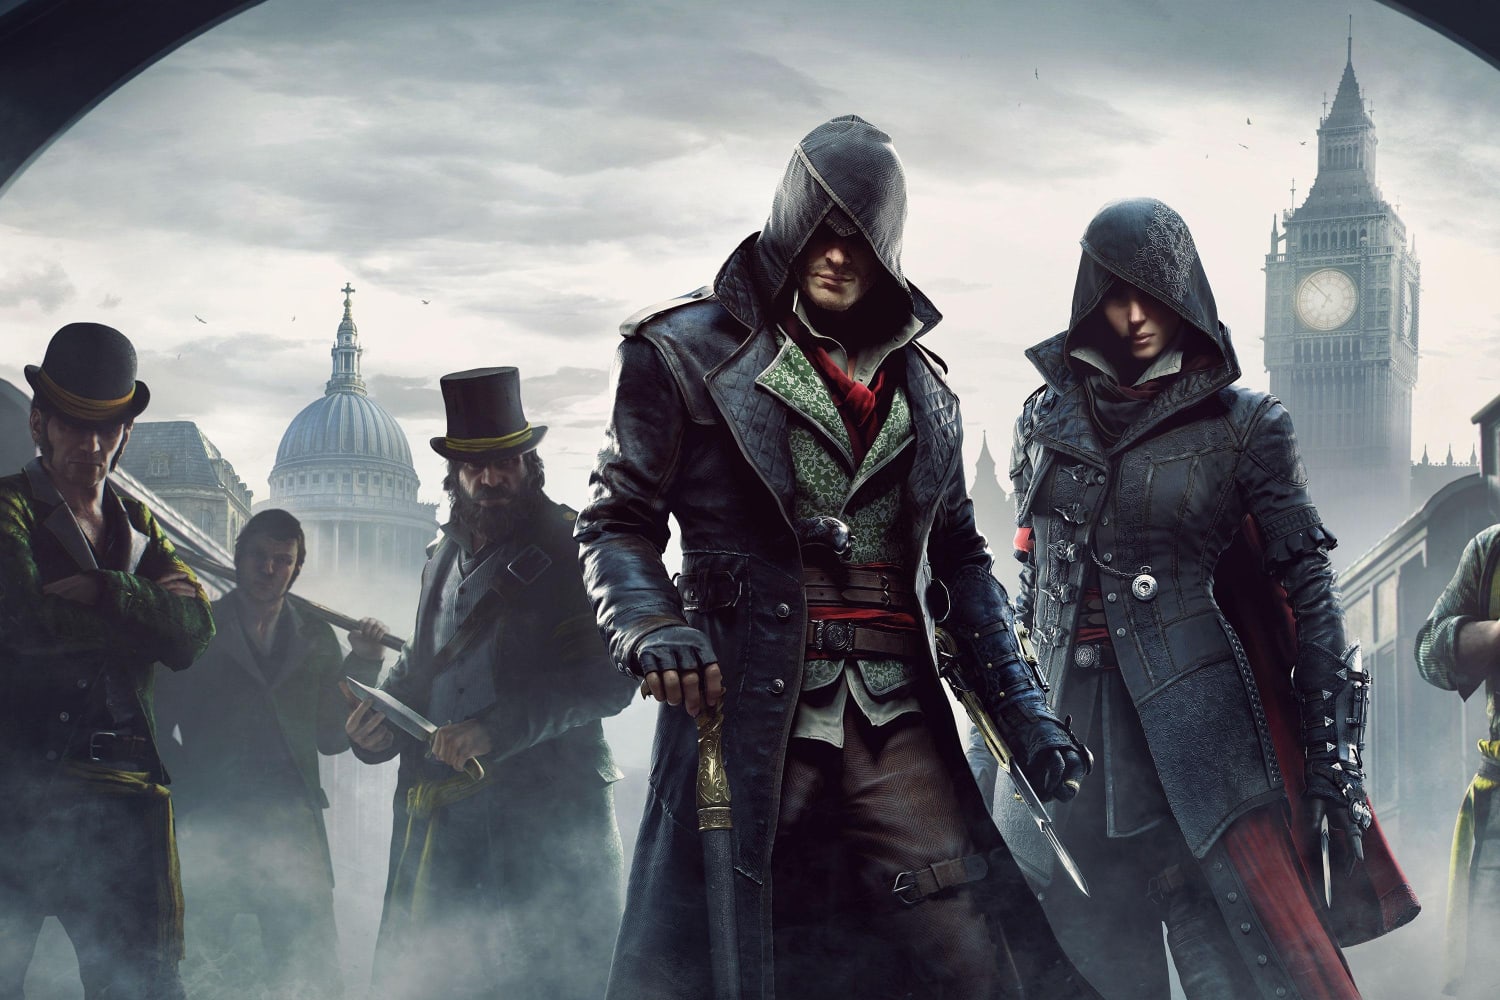 Assassin's Creed Unity hands-on – stealthy thrills in pre-Revolution Paris, Games